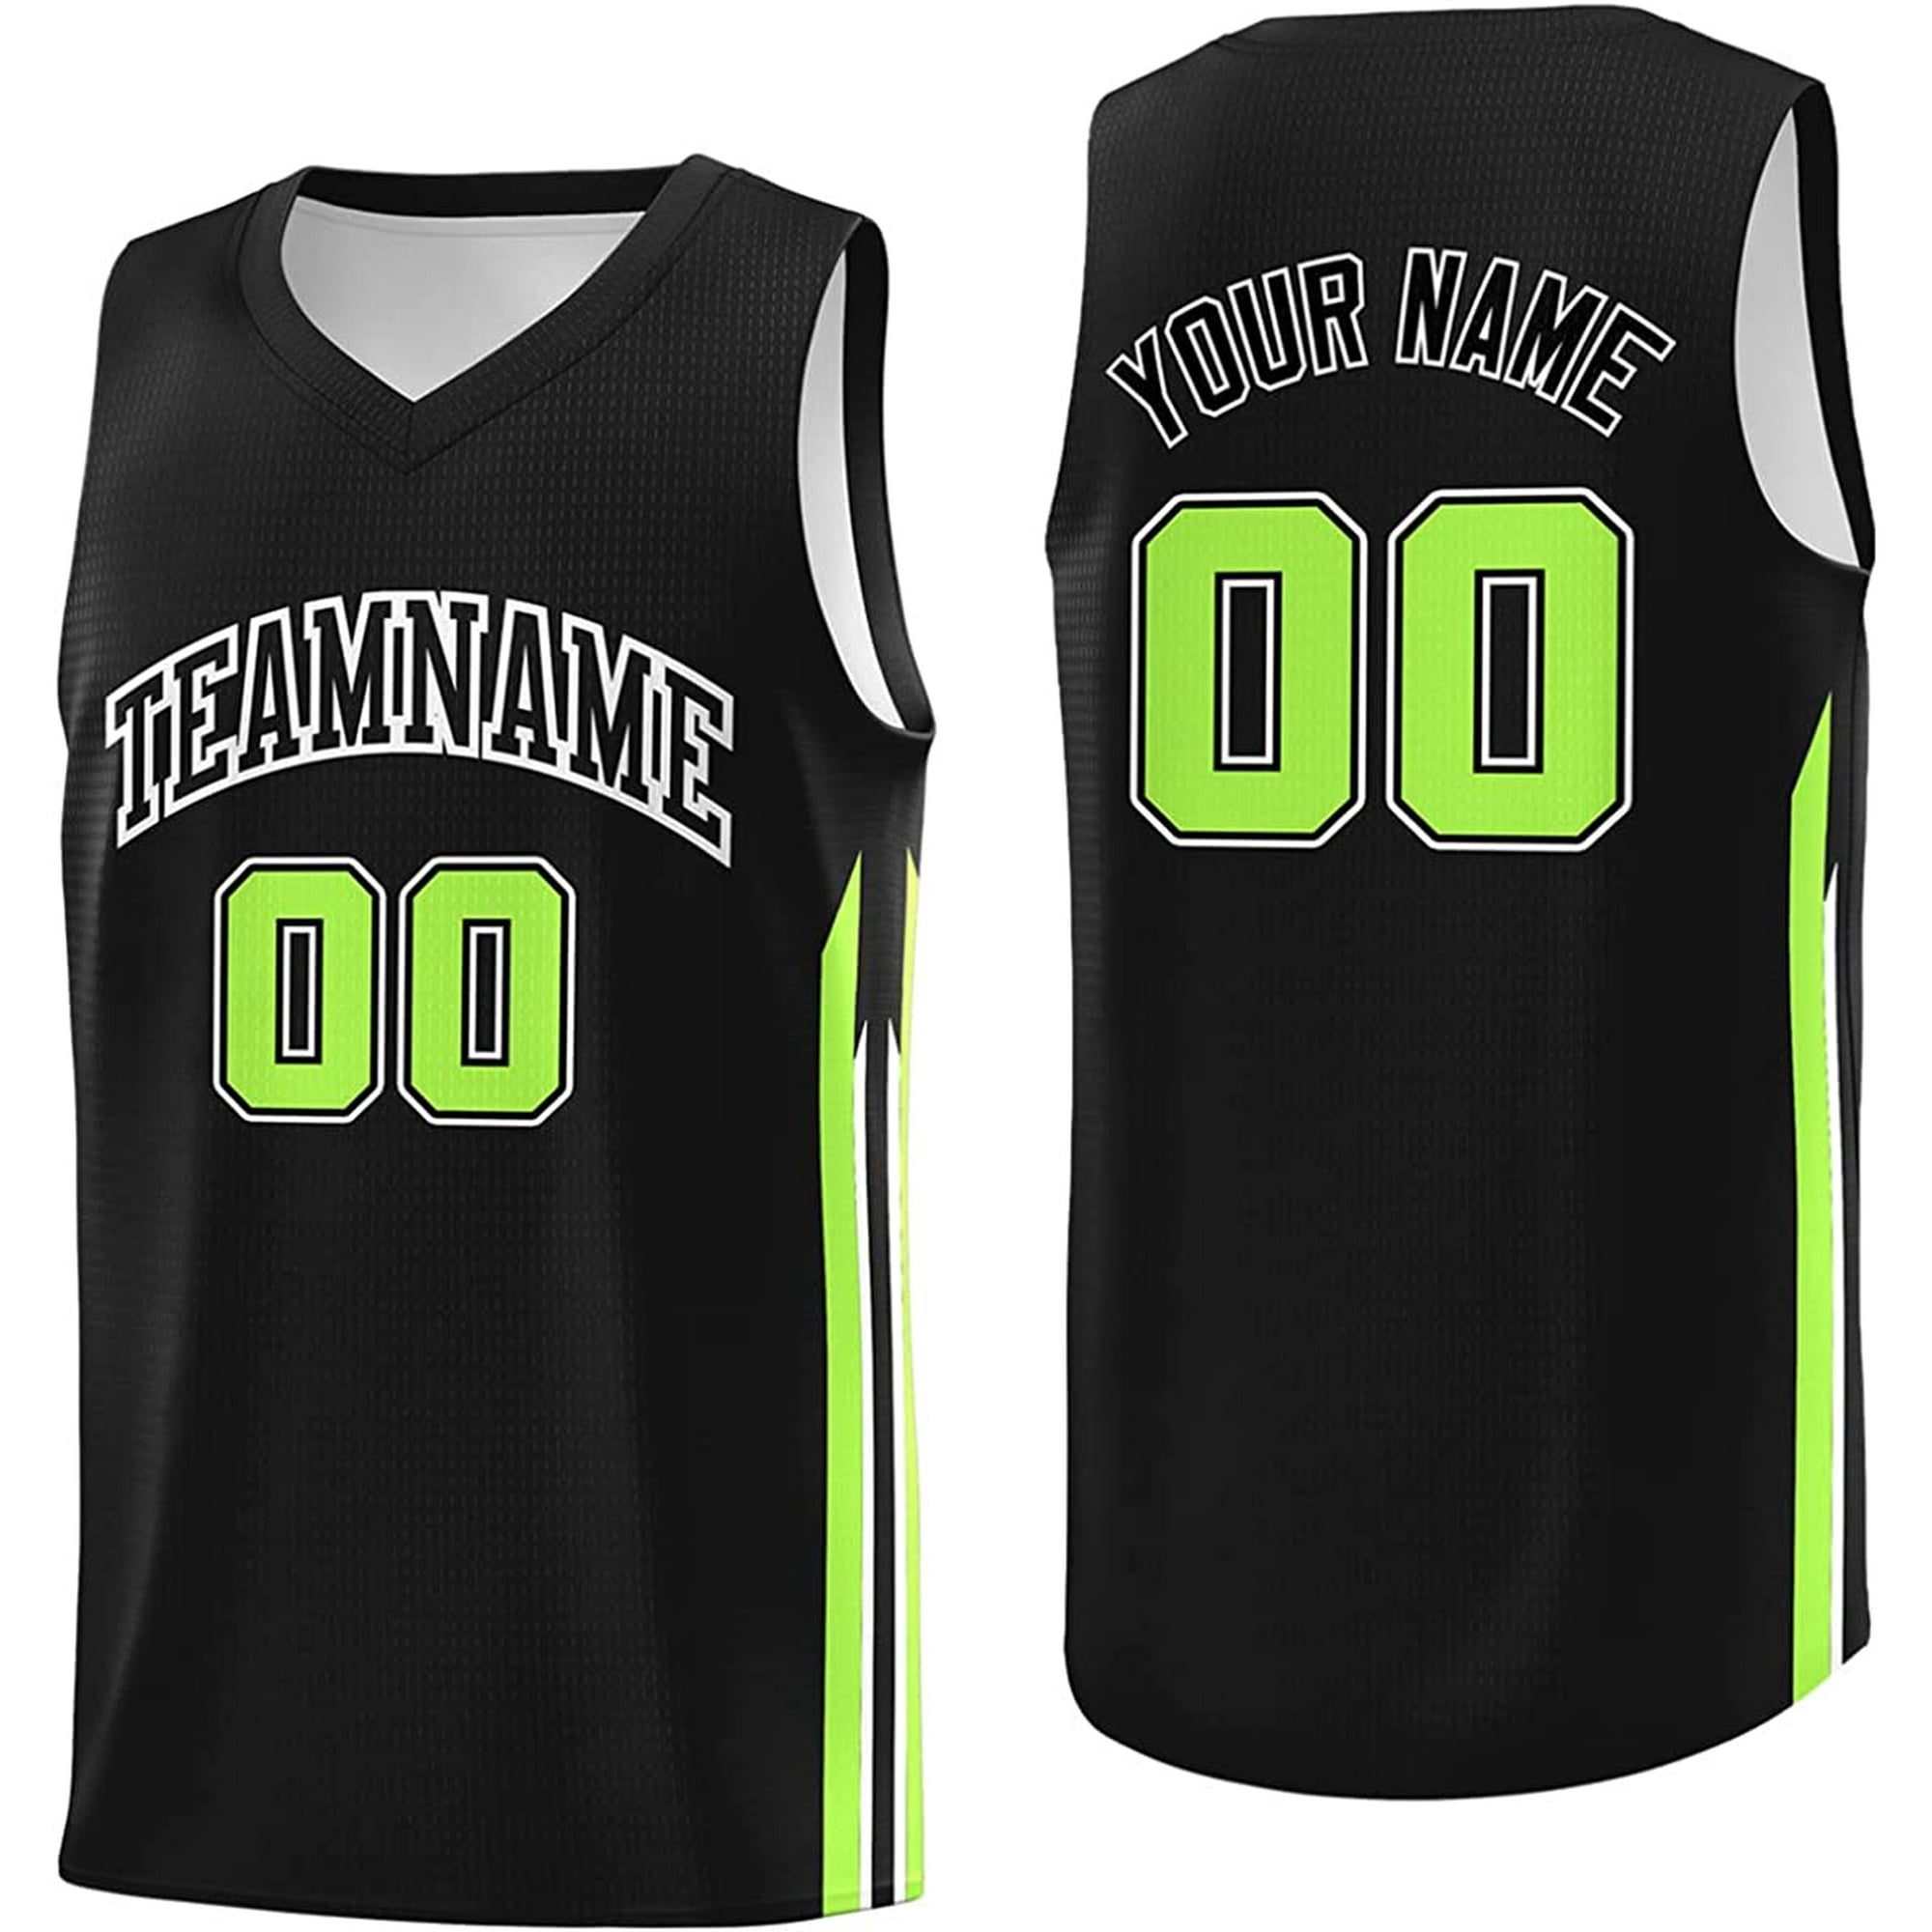 Wholesale Custom Blank Basketball Jersey Custom Sublimation Printing  Personalized Numbers Sleeveless Basketball Uniforms For Men